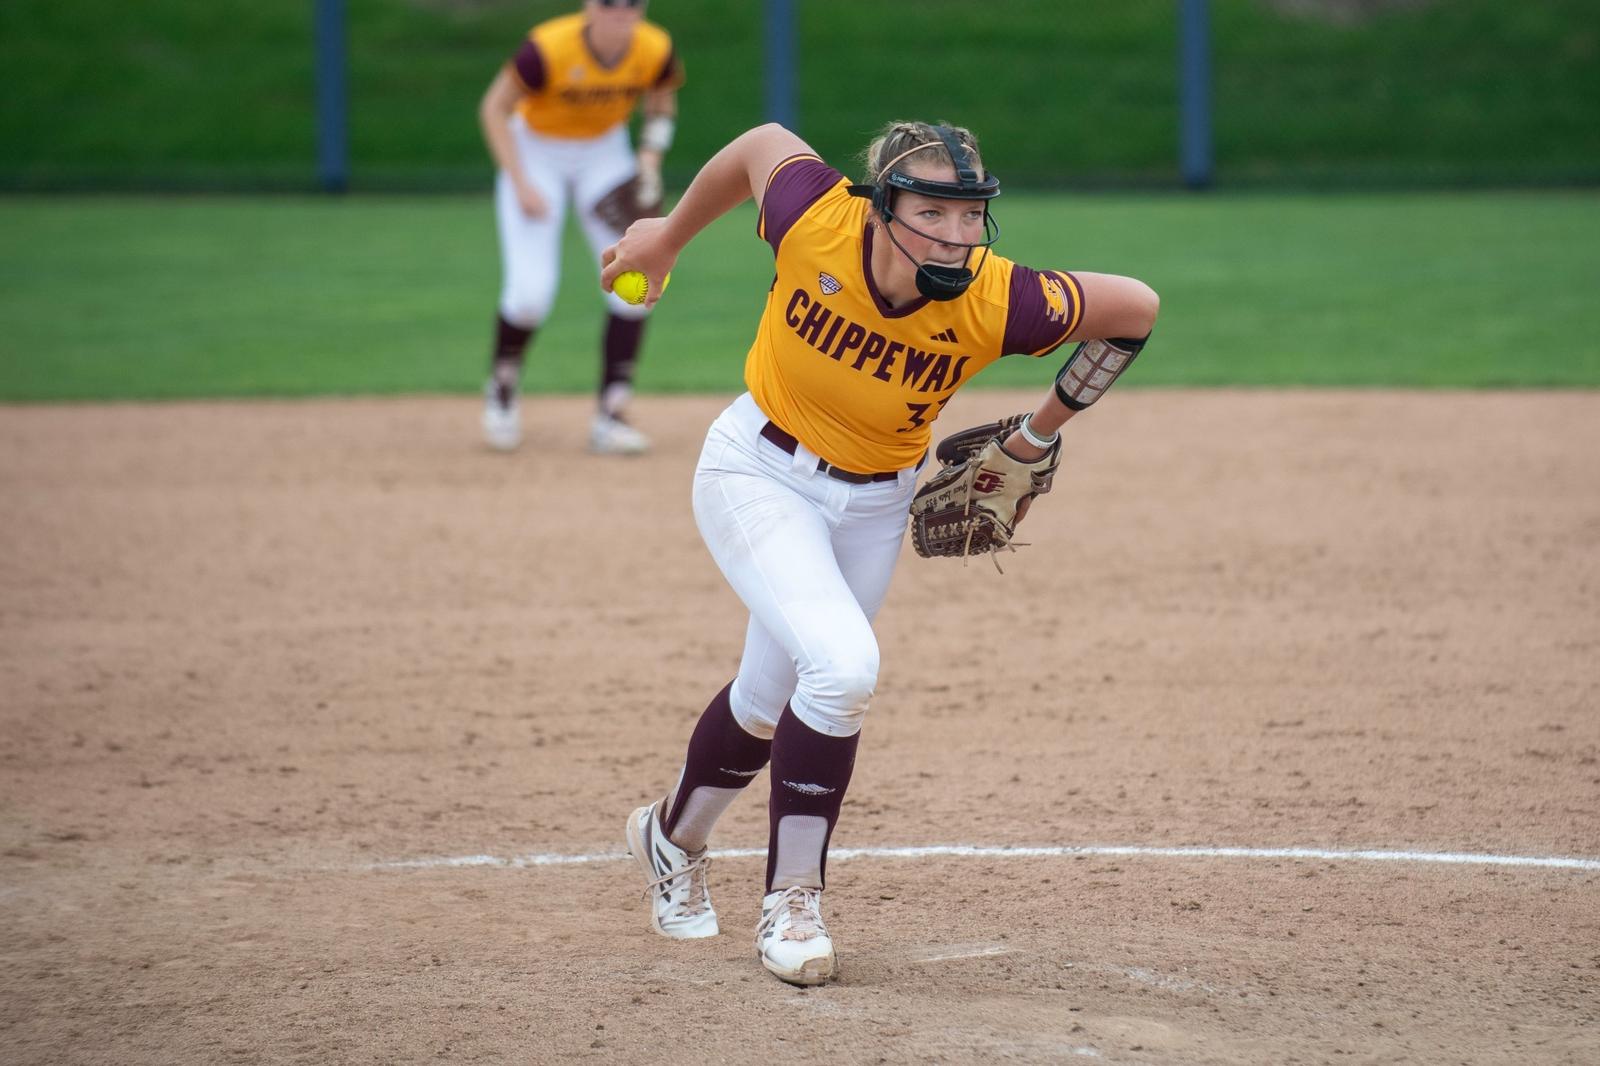 Lehto Strikes Out Nine, Coberley Homers and Softball Leaves Akron with a Win